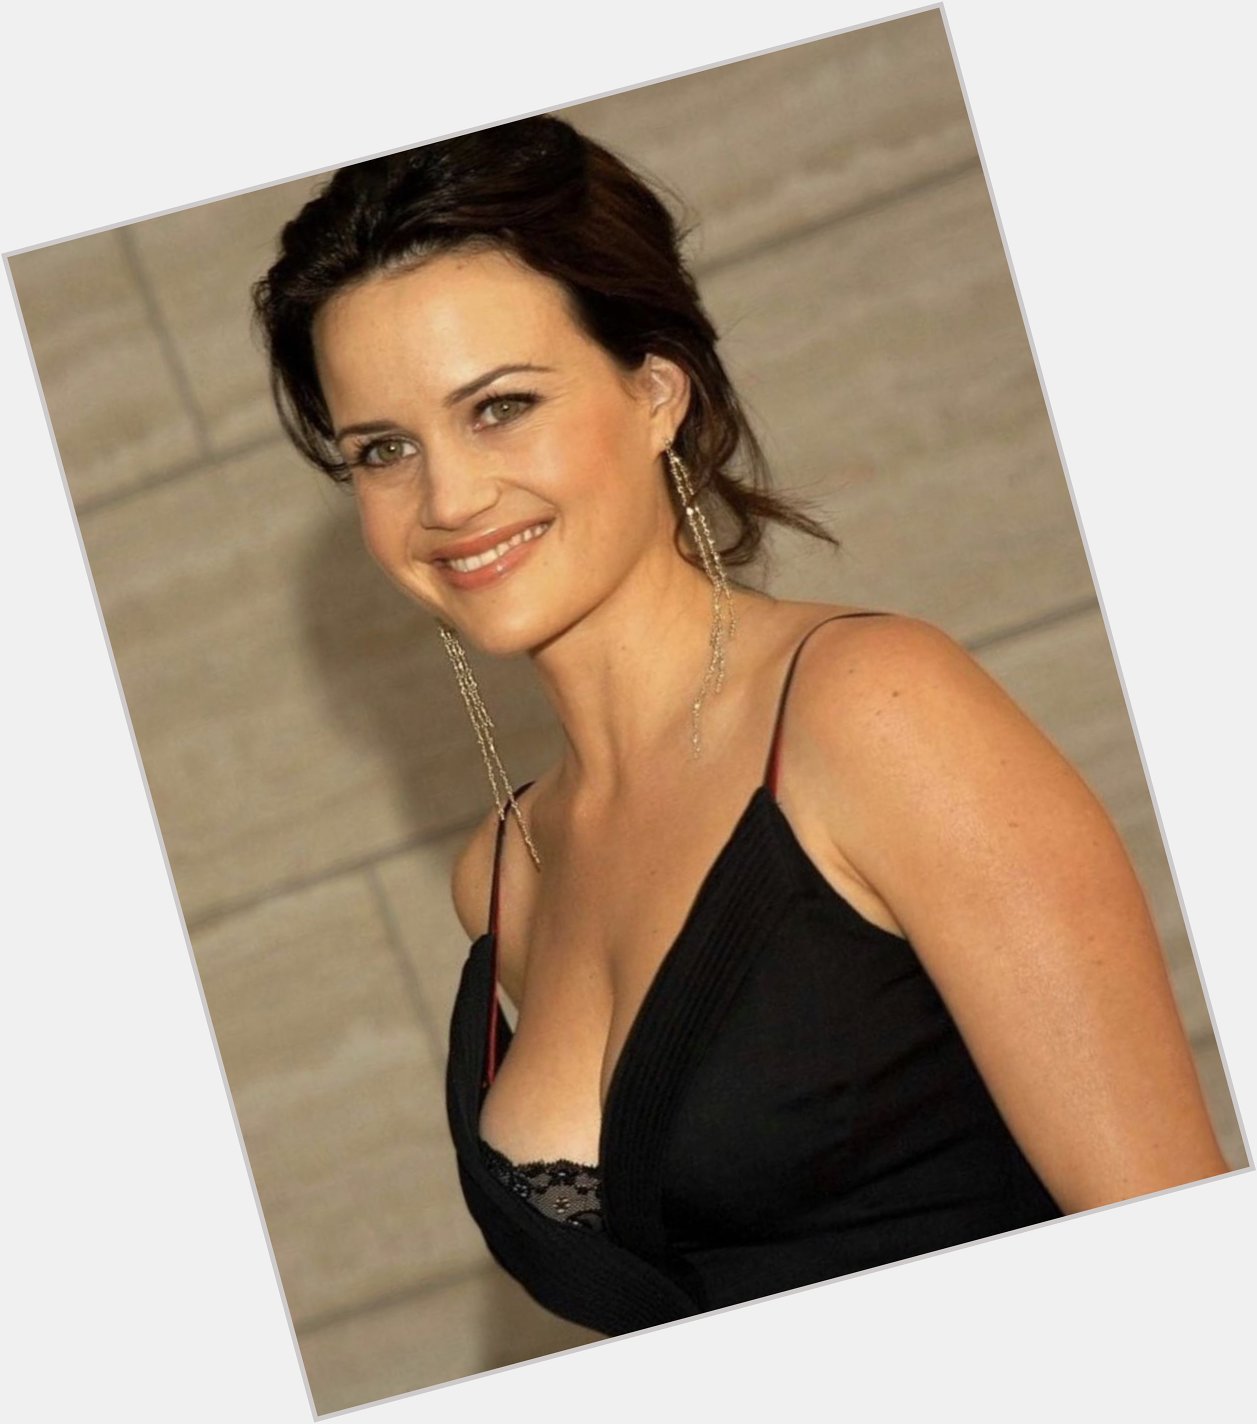 Happy 50th Birthday Shout Out to the lovely Carla Gugino!!! 